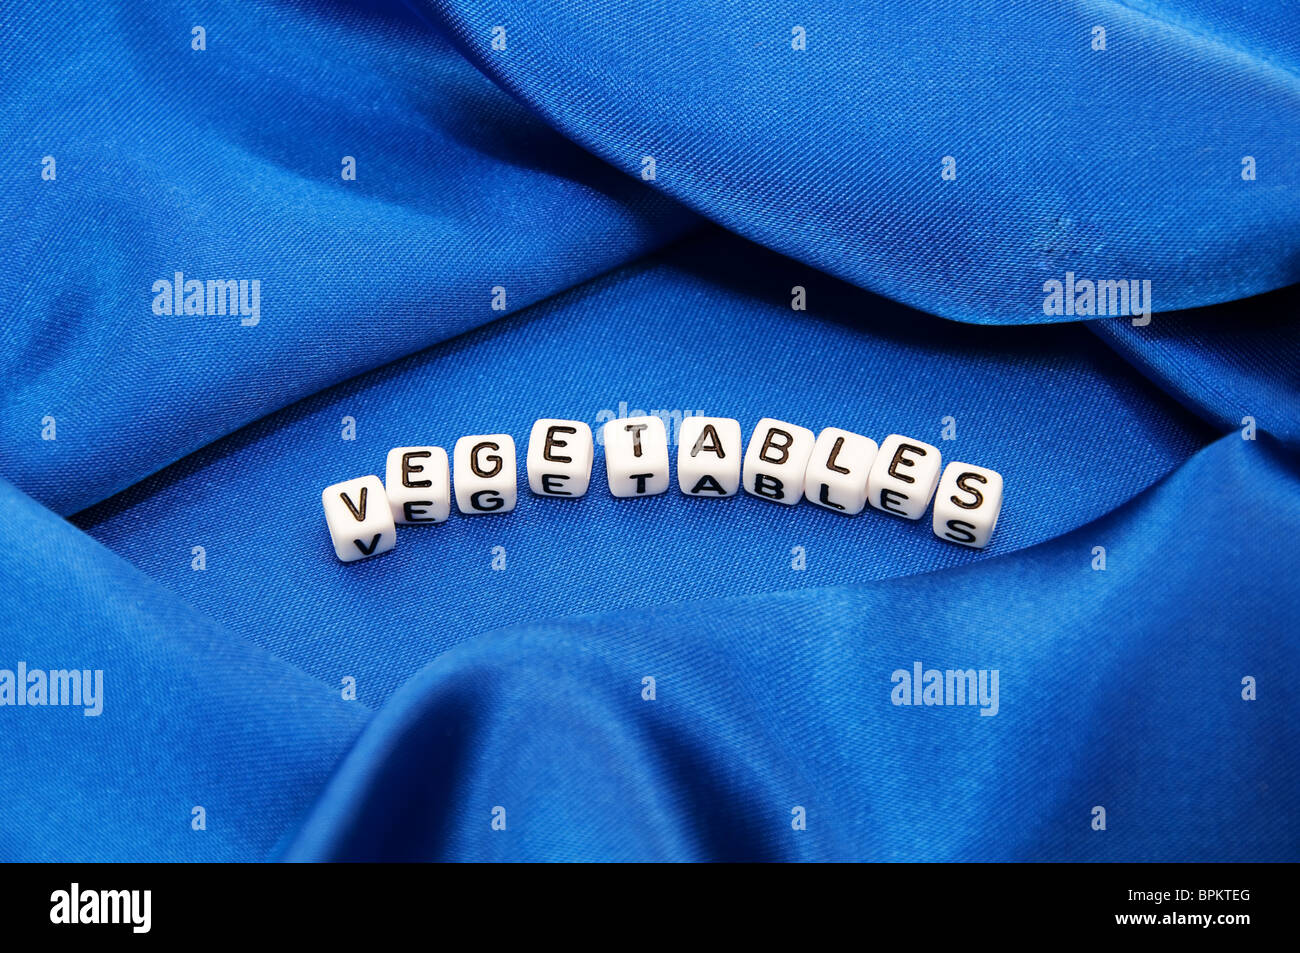 Royal blue satin background with rich folds and wrinkles for texture is the word vegetables in cube lettering series Stock Photo